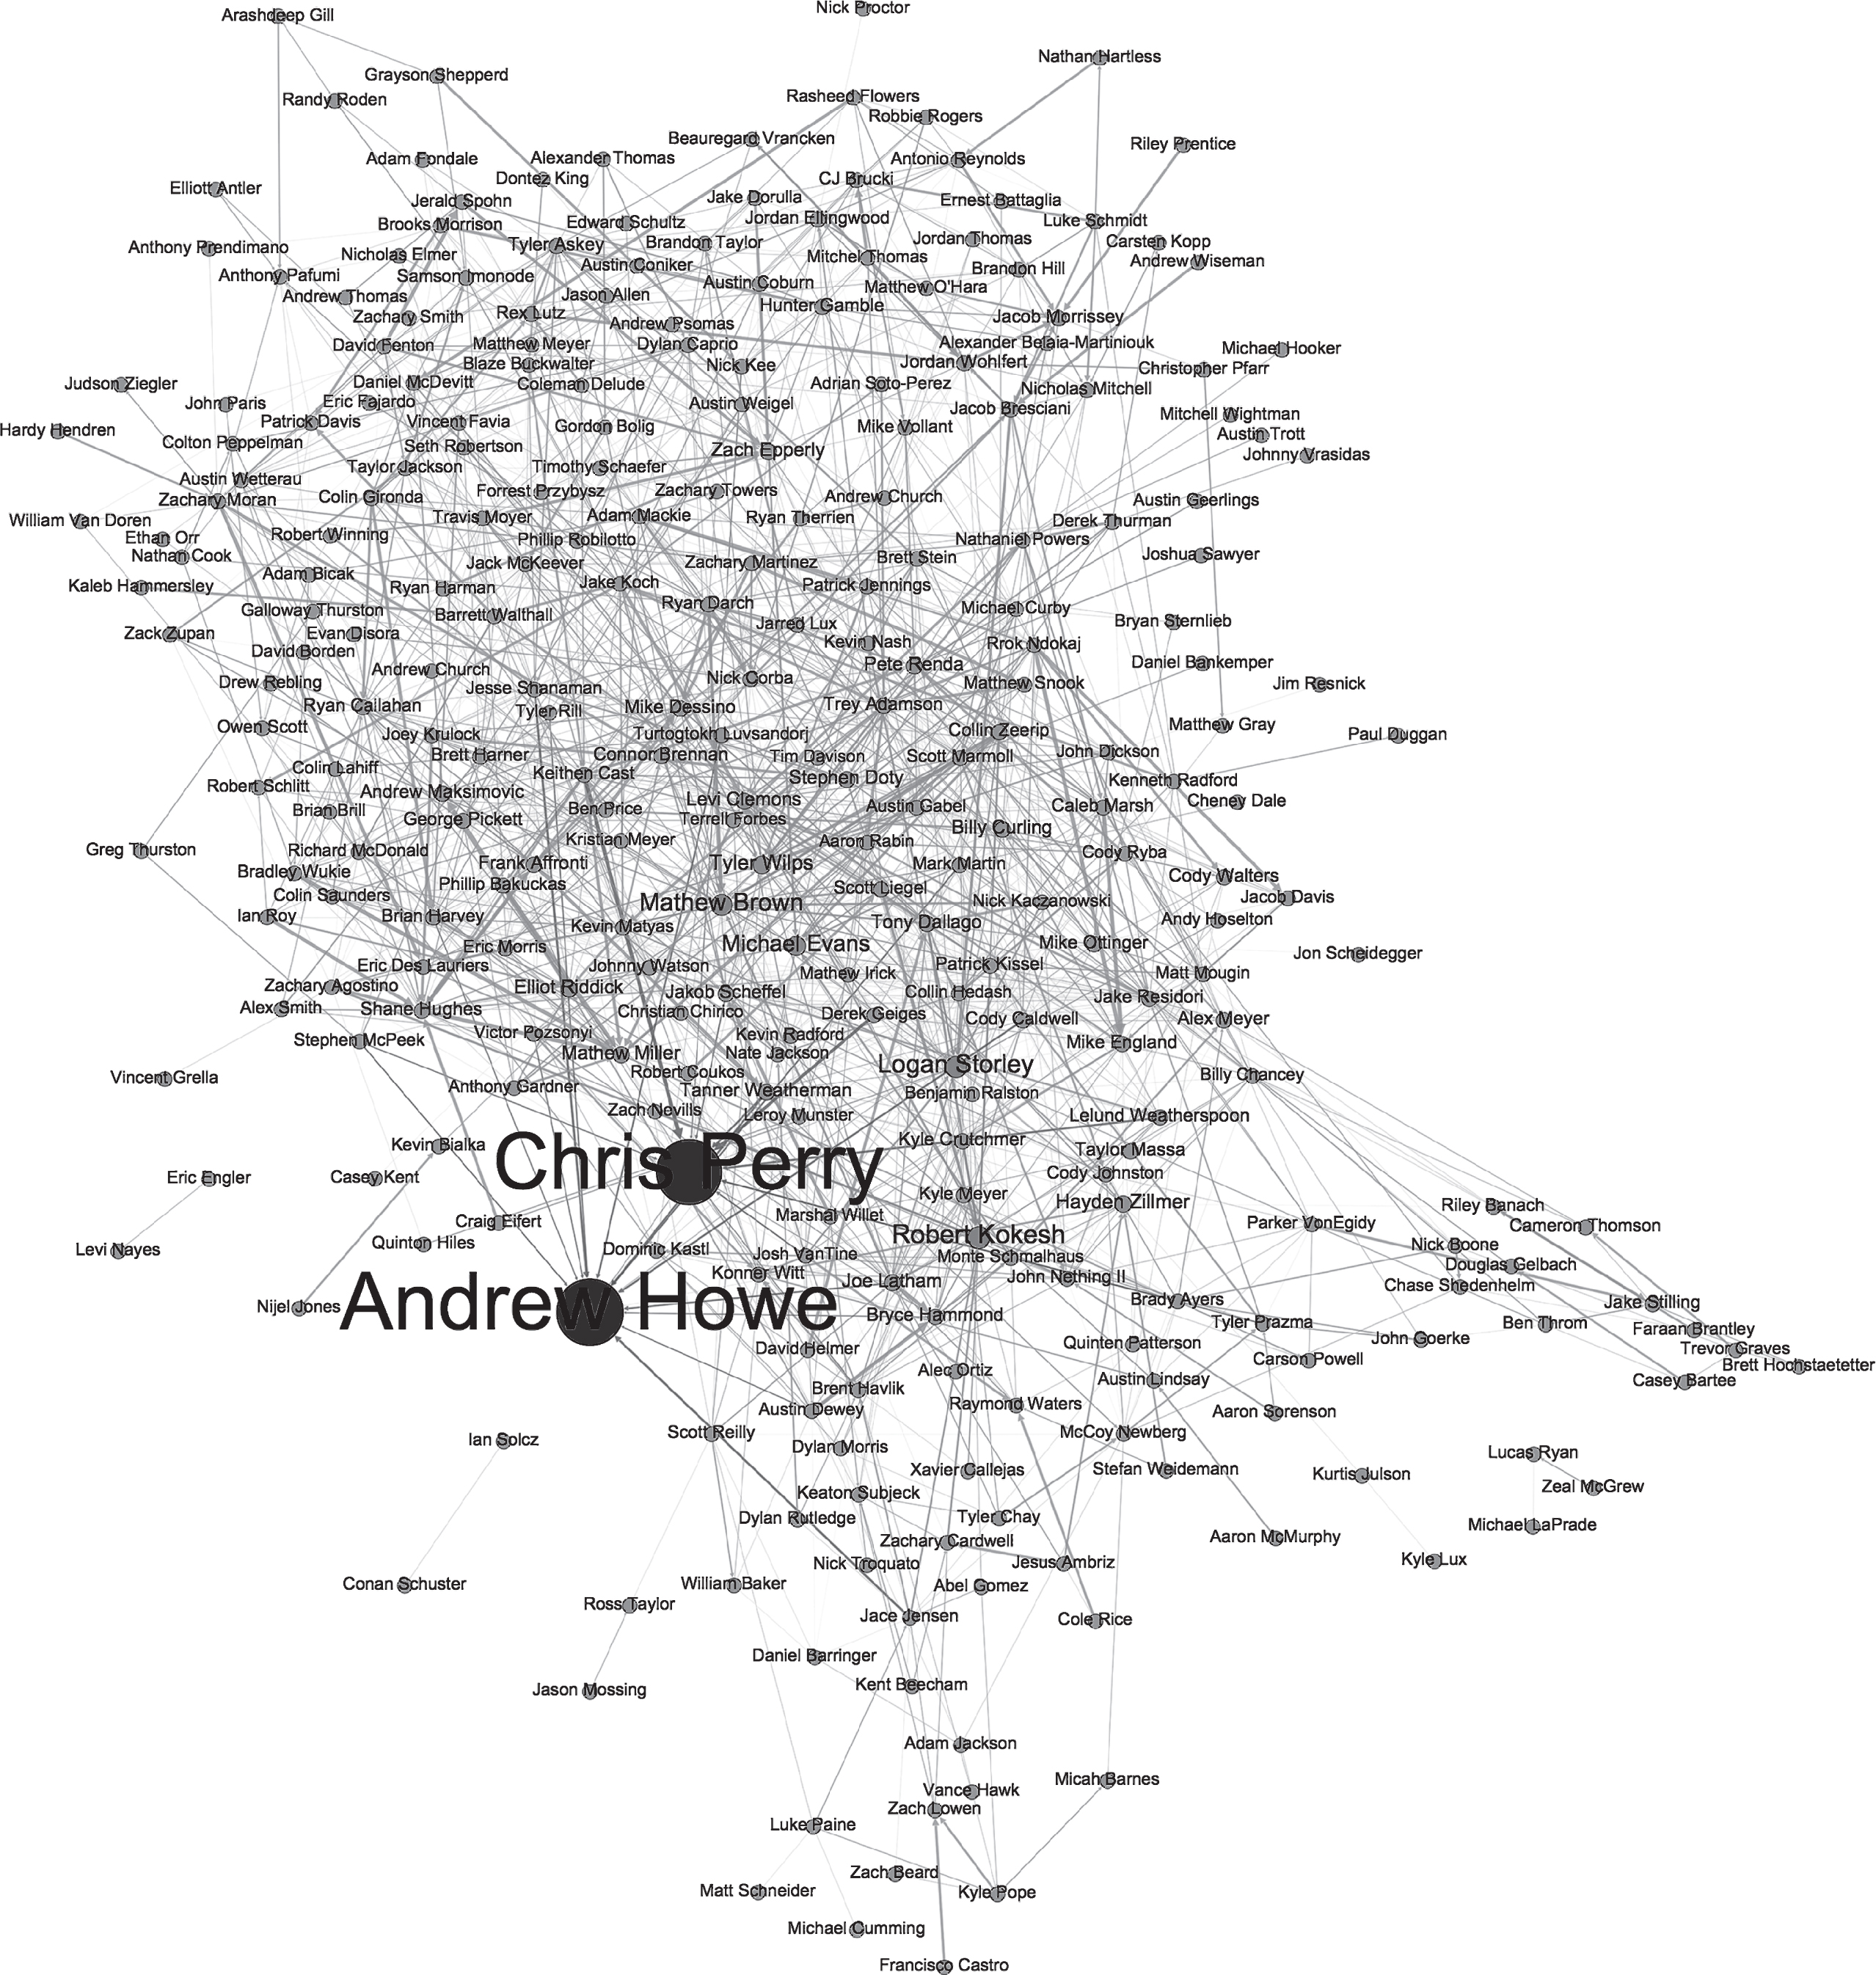 Visualization of 174-pound wrestler network. Nodes sized and colored by DPD PageRank, light = low, dark = high.